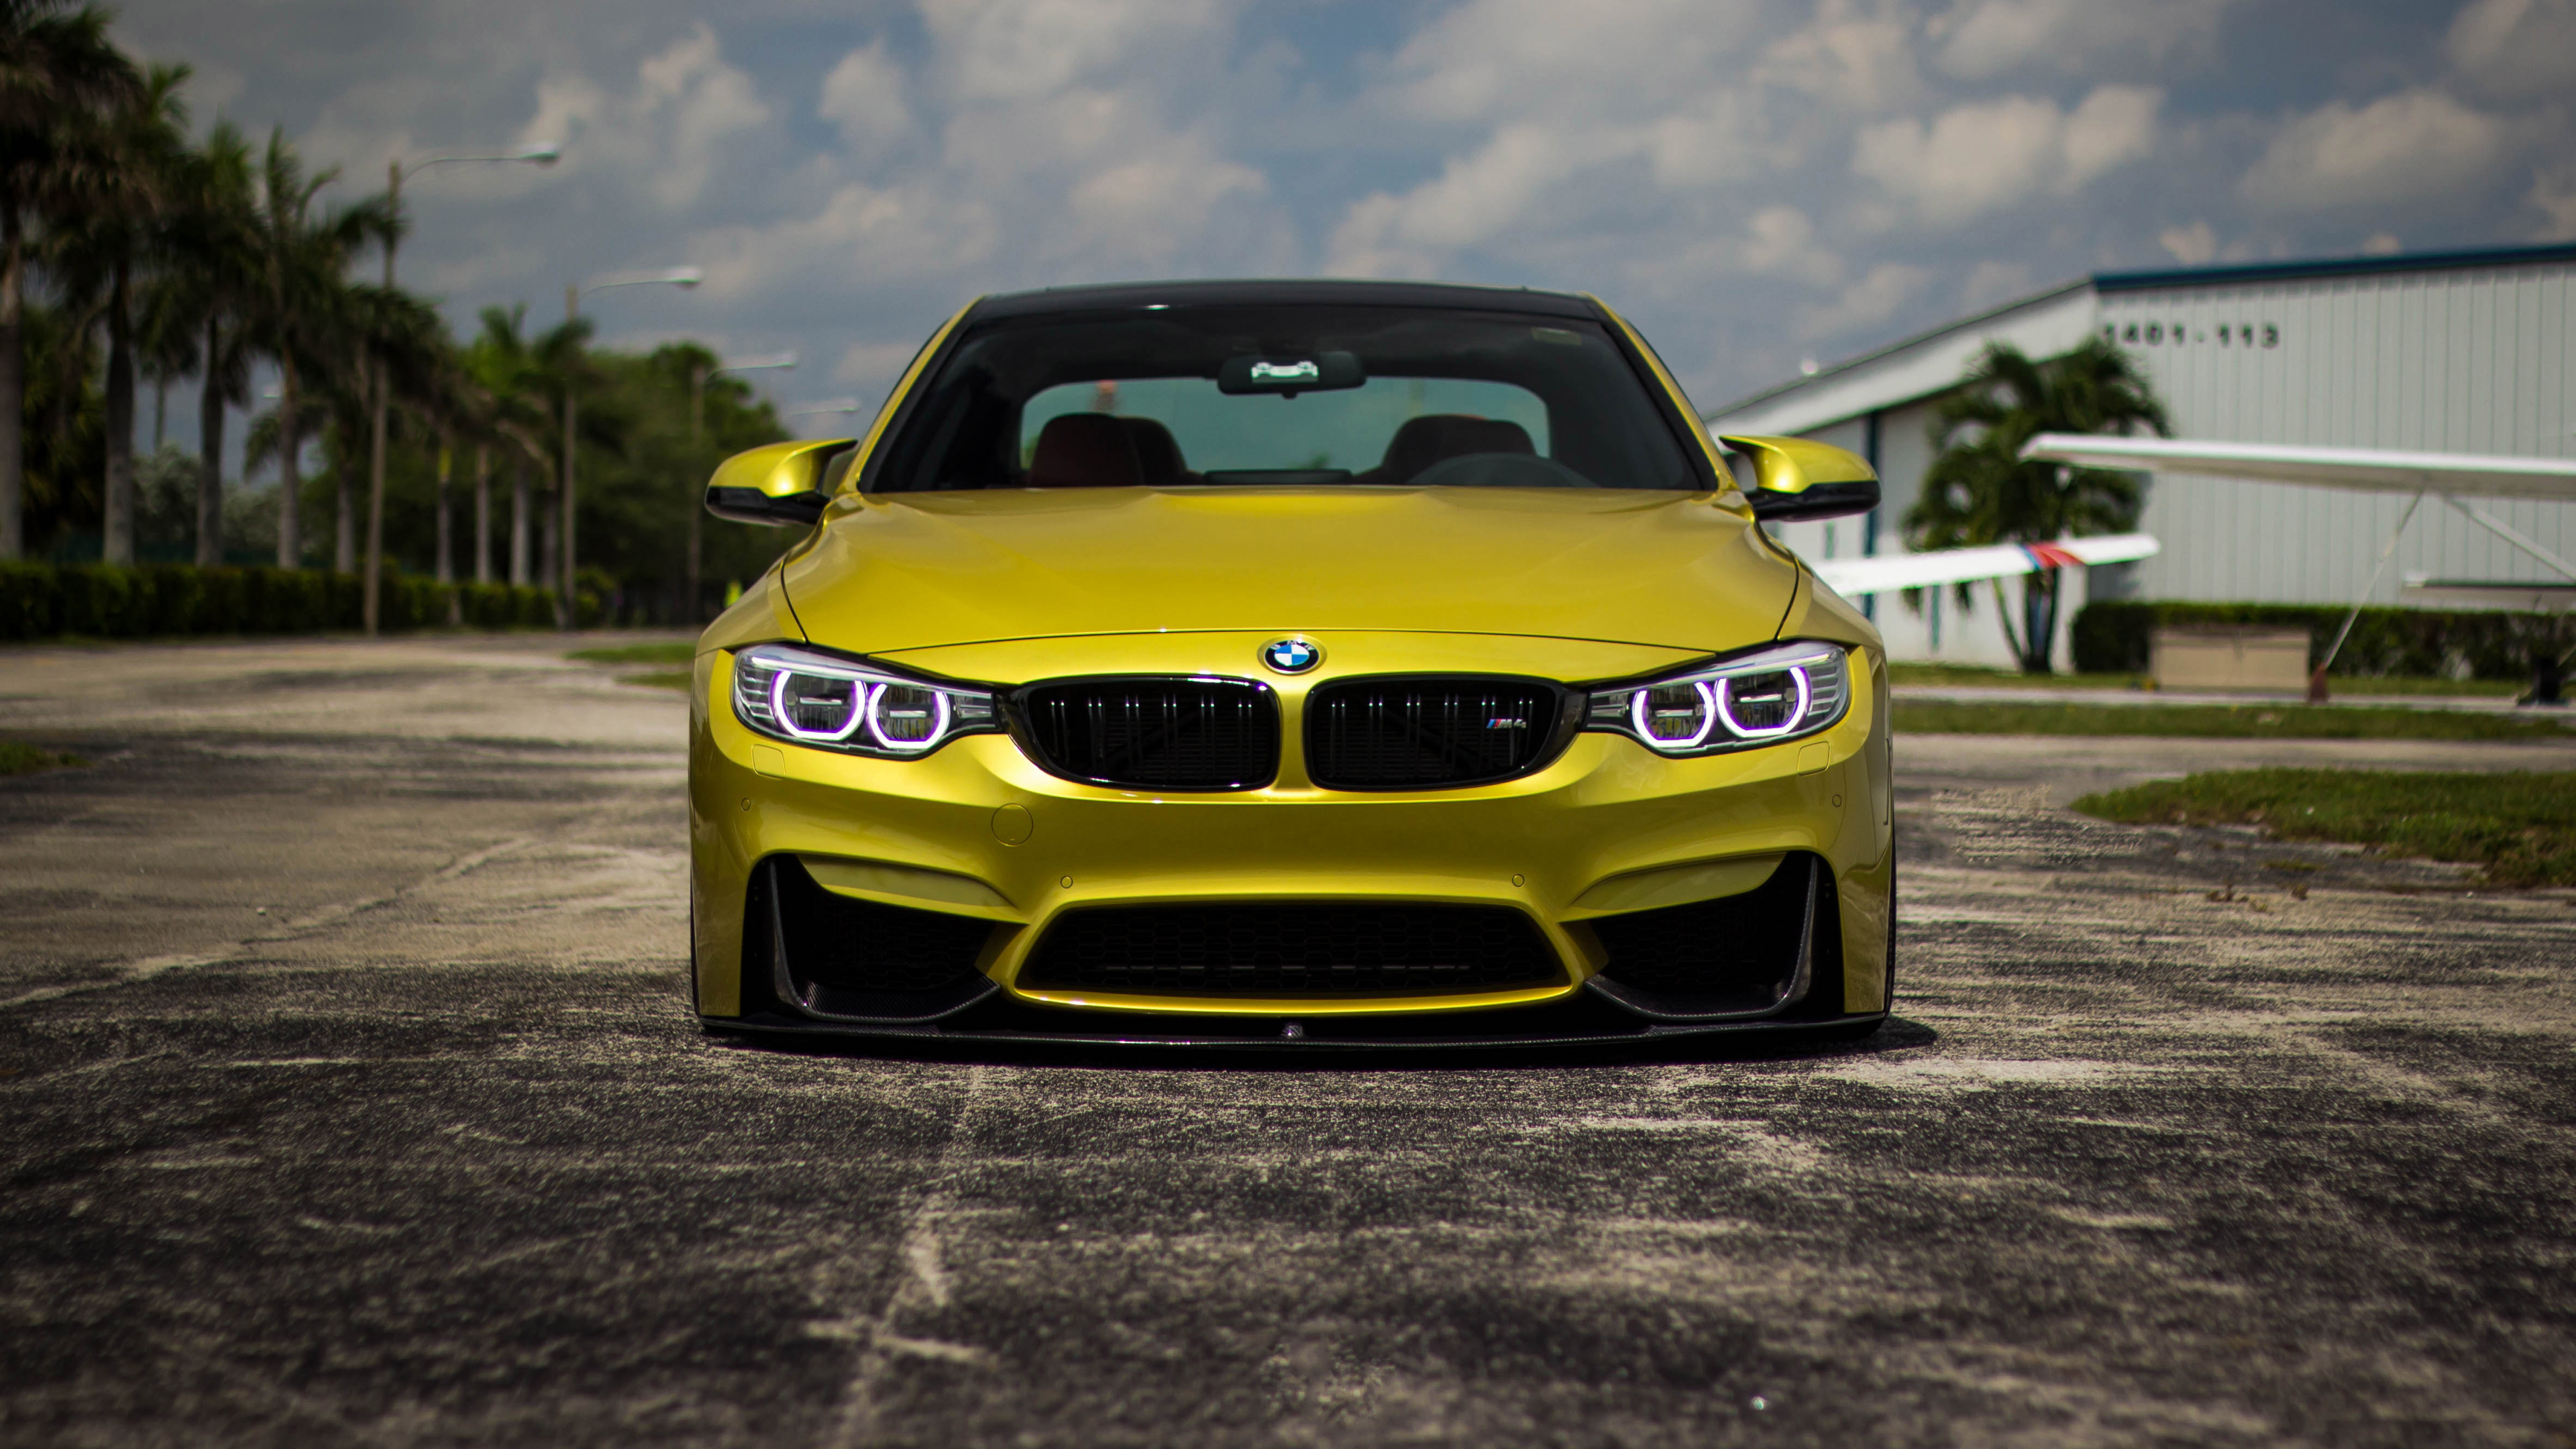 Yellow Bmw m 3 on Road During Daytime. Wallpaper in 3840x2160 Resolution